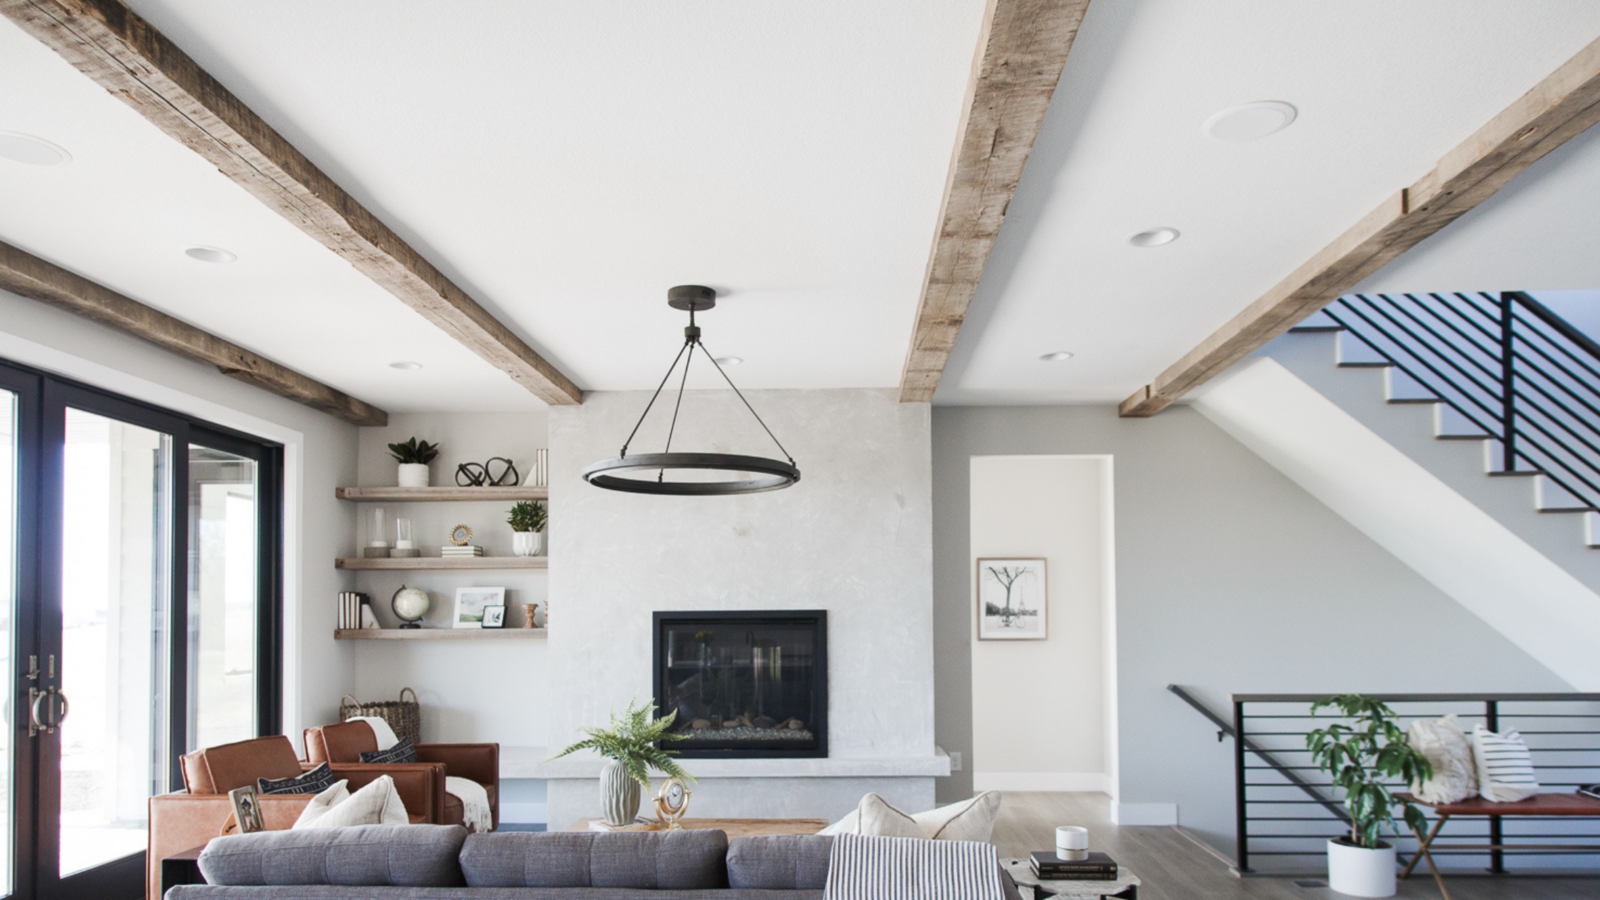 Dakota Timber Co Reclaimed Wood Ceiling Beams and Timbers - Structural Beams